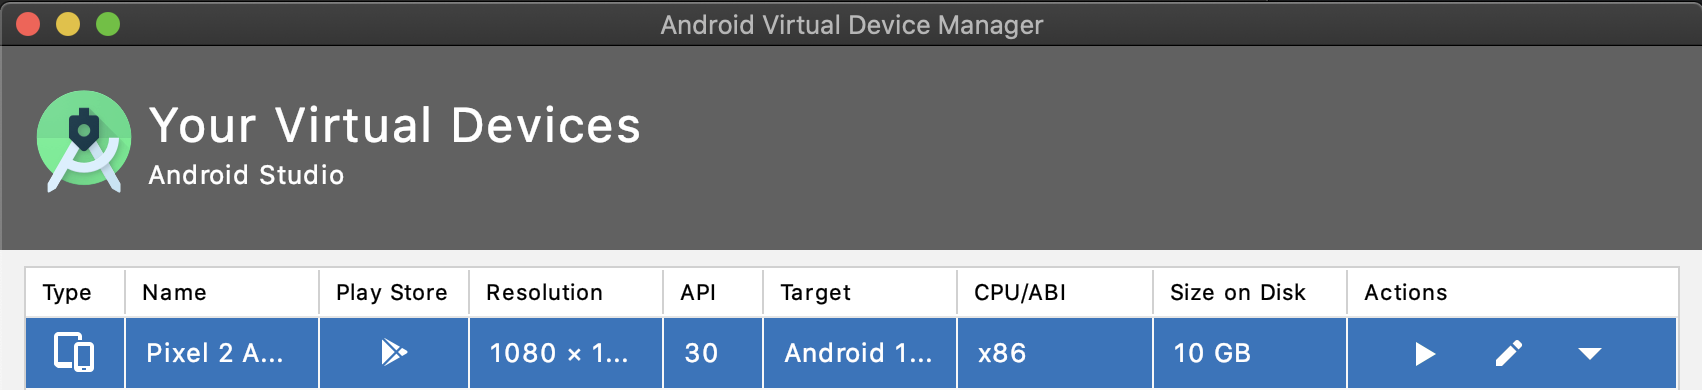 Android Virtual Device Manager画面